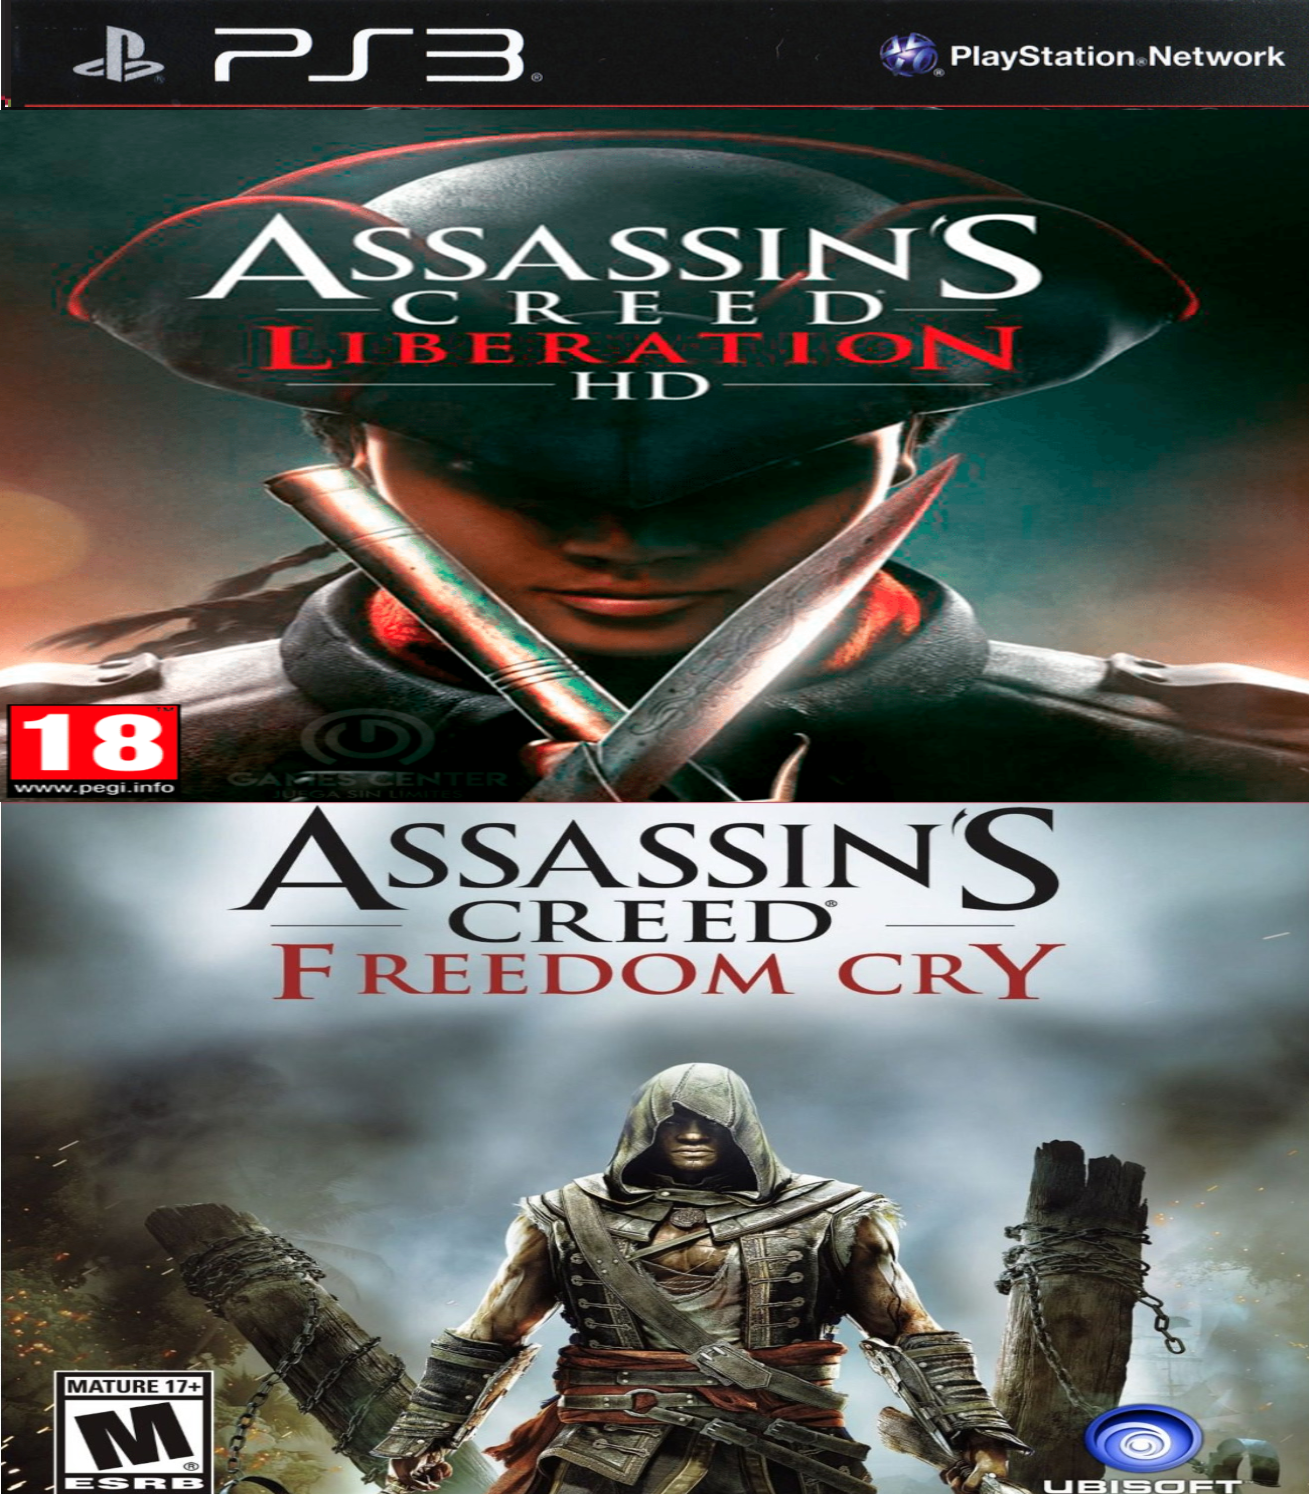 Assassin’s Creed Bundle (Liberation/Freedom Cry)